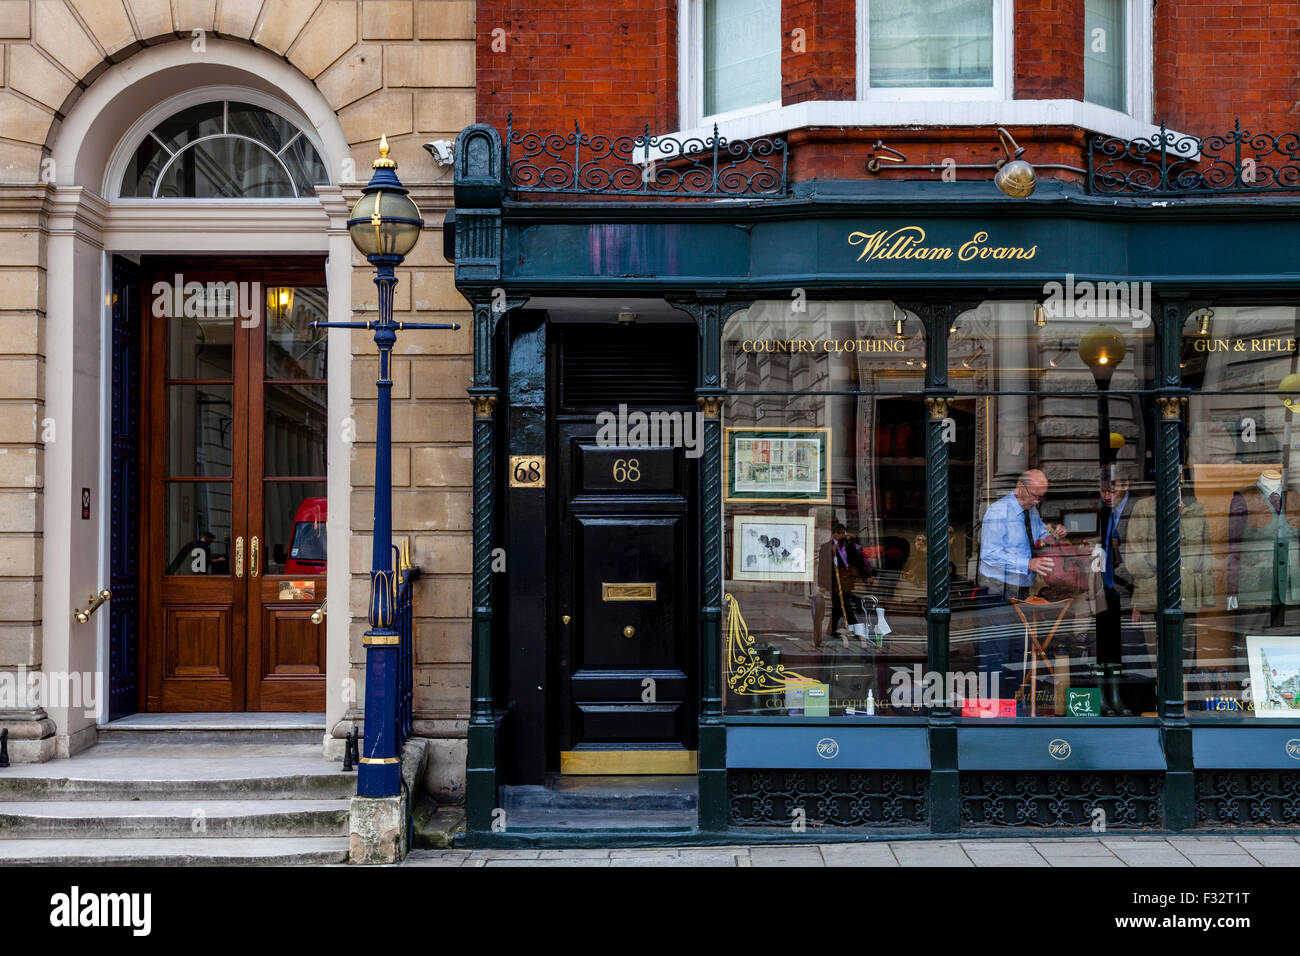 William Evans Country Clothing Shop, St James's Street, London, UK Stock Photo